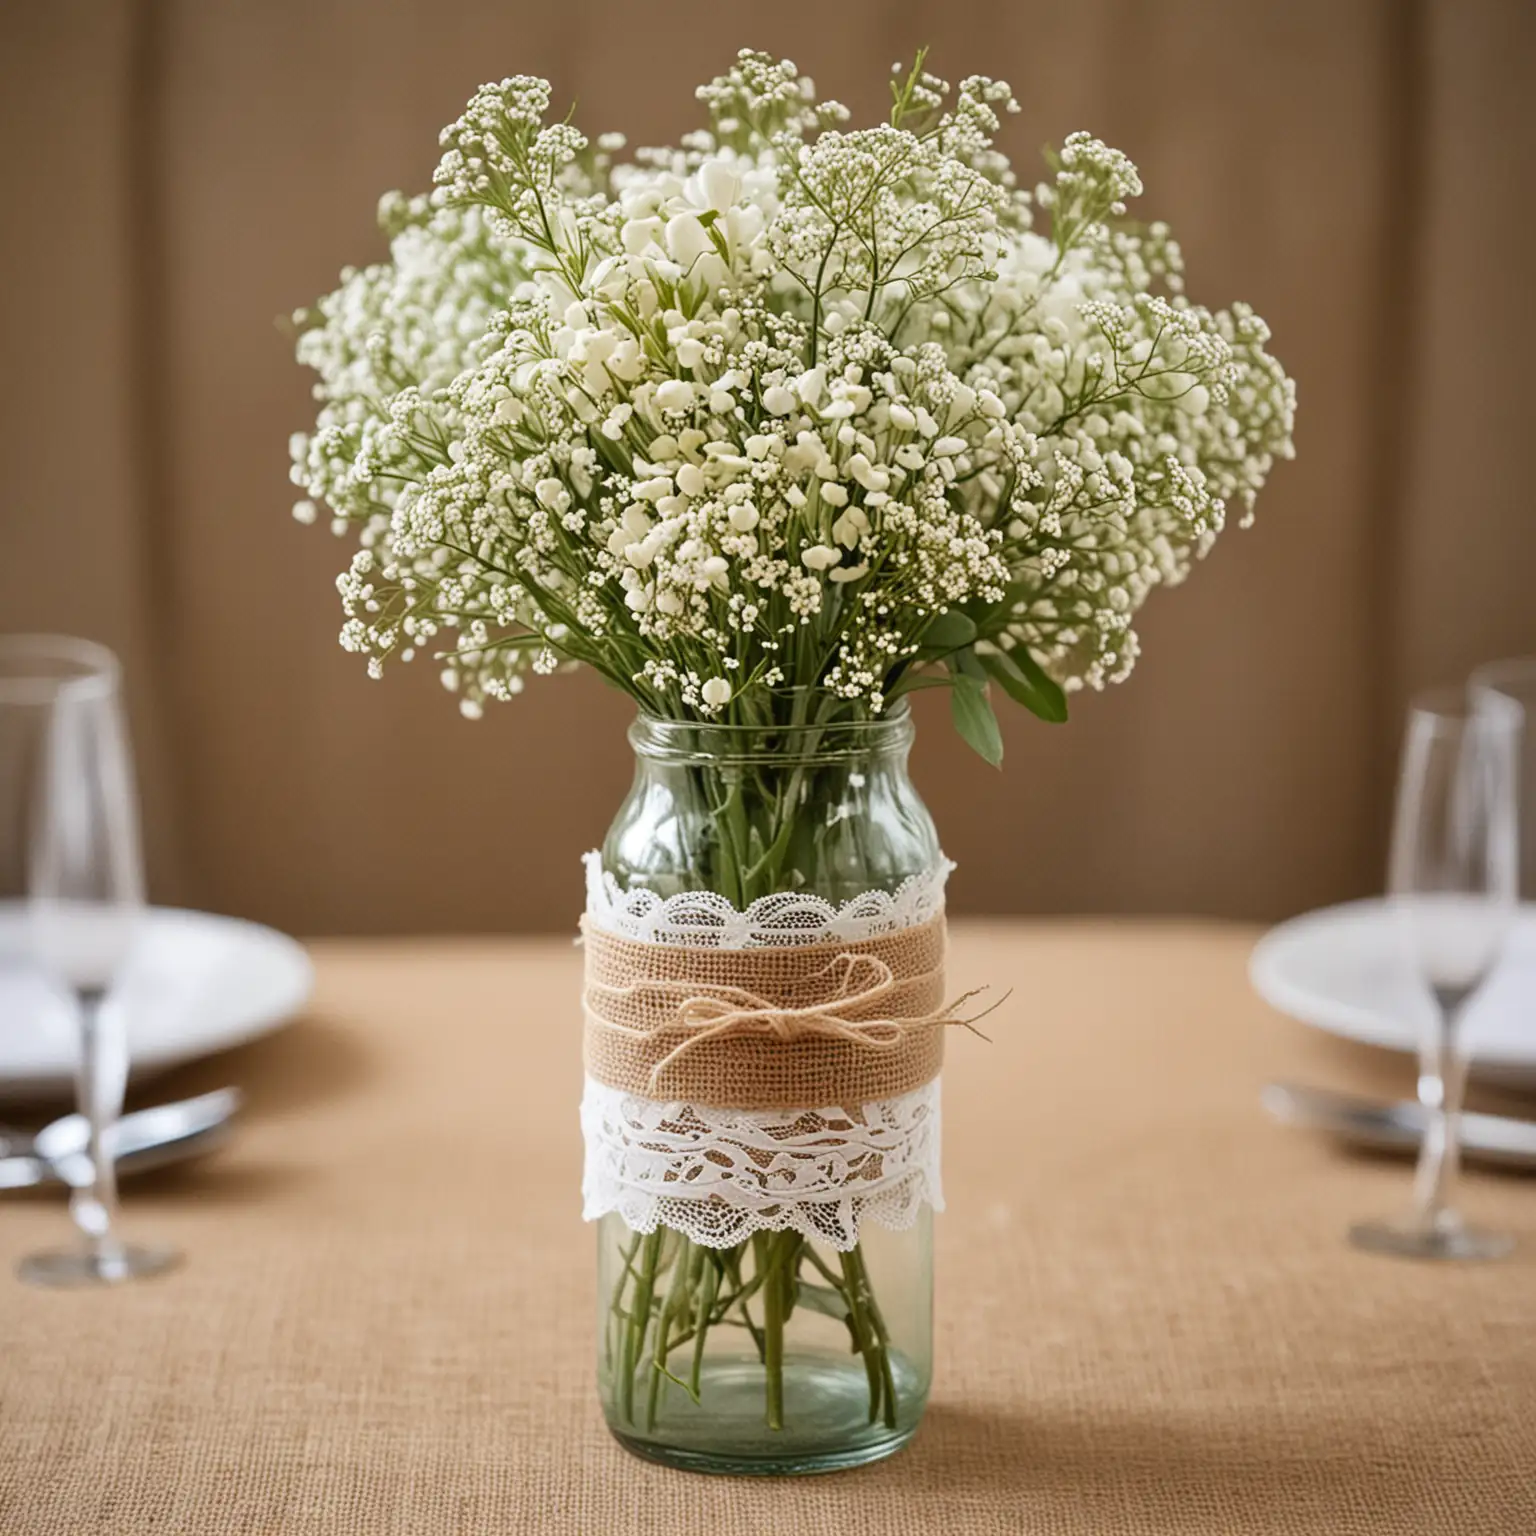 Rustic-Burlap-and-Lace-Wedding-Centerpiece-with-Babys-Breath